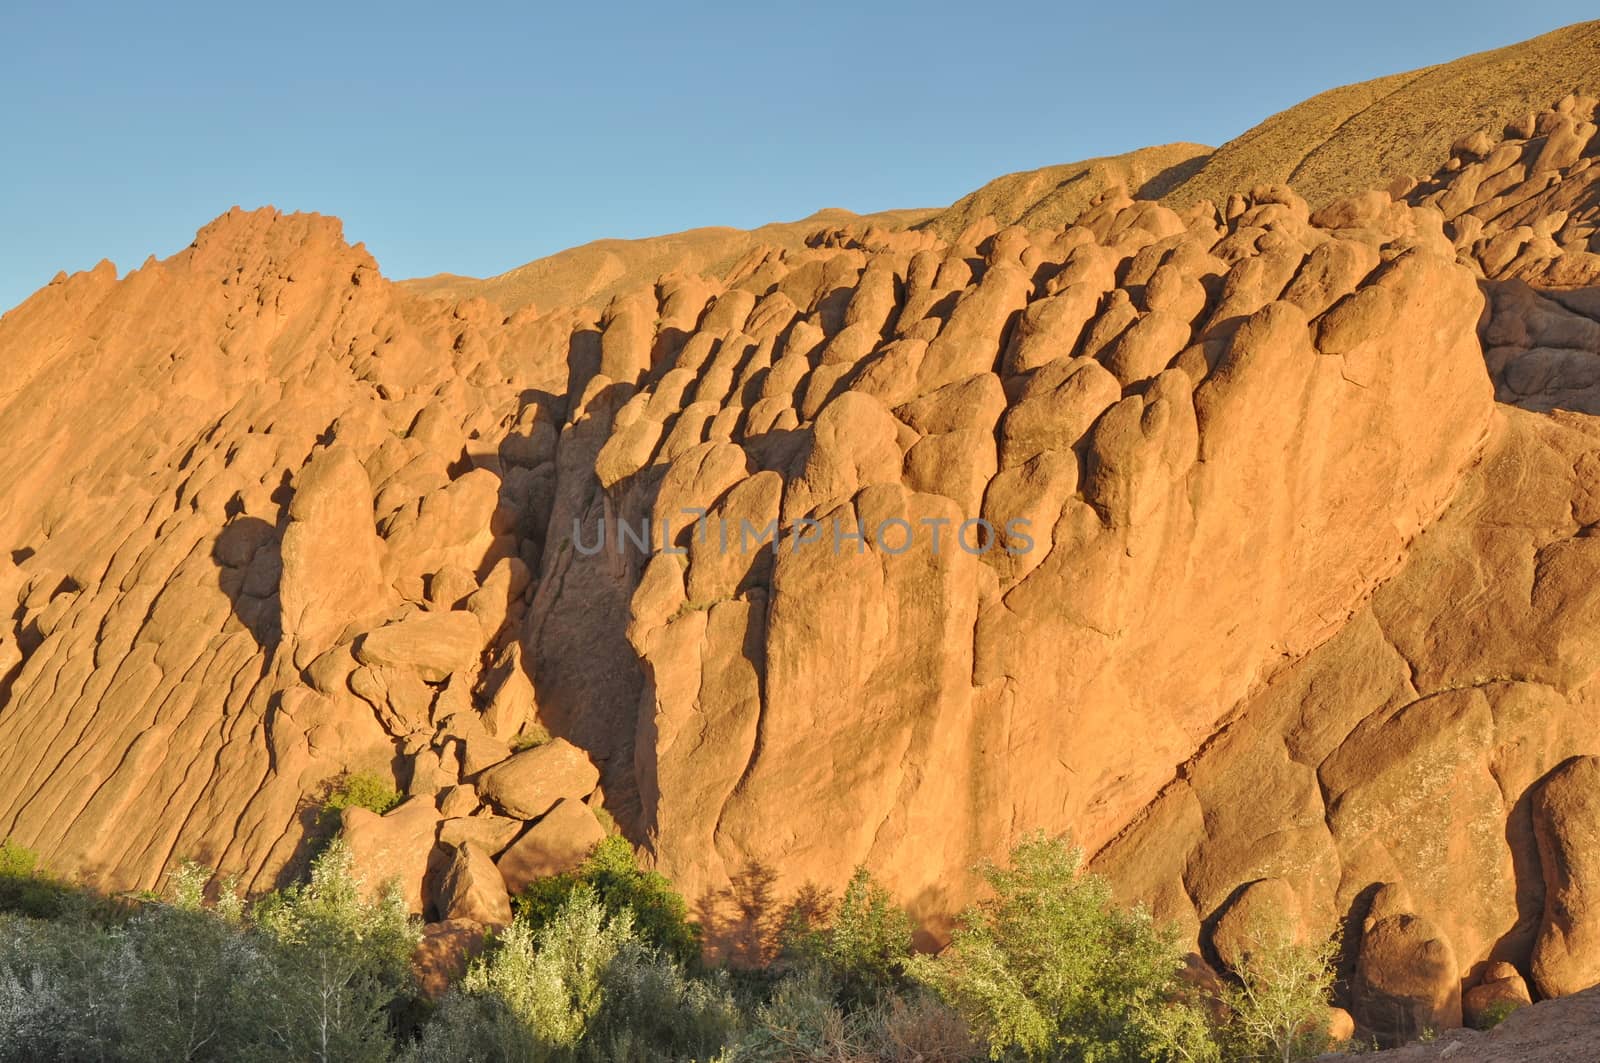 Strange rock formations in Dades Gorge, Morocco, Africa